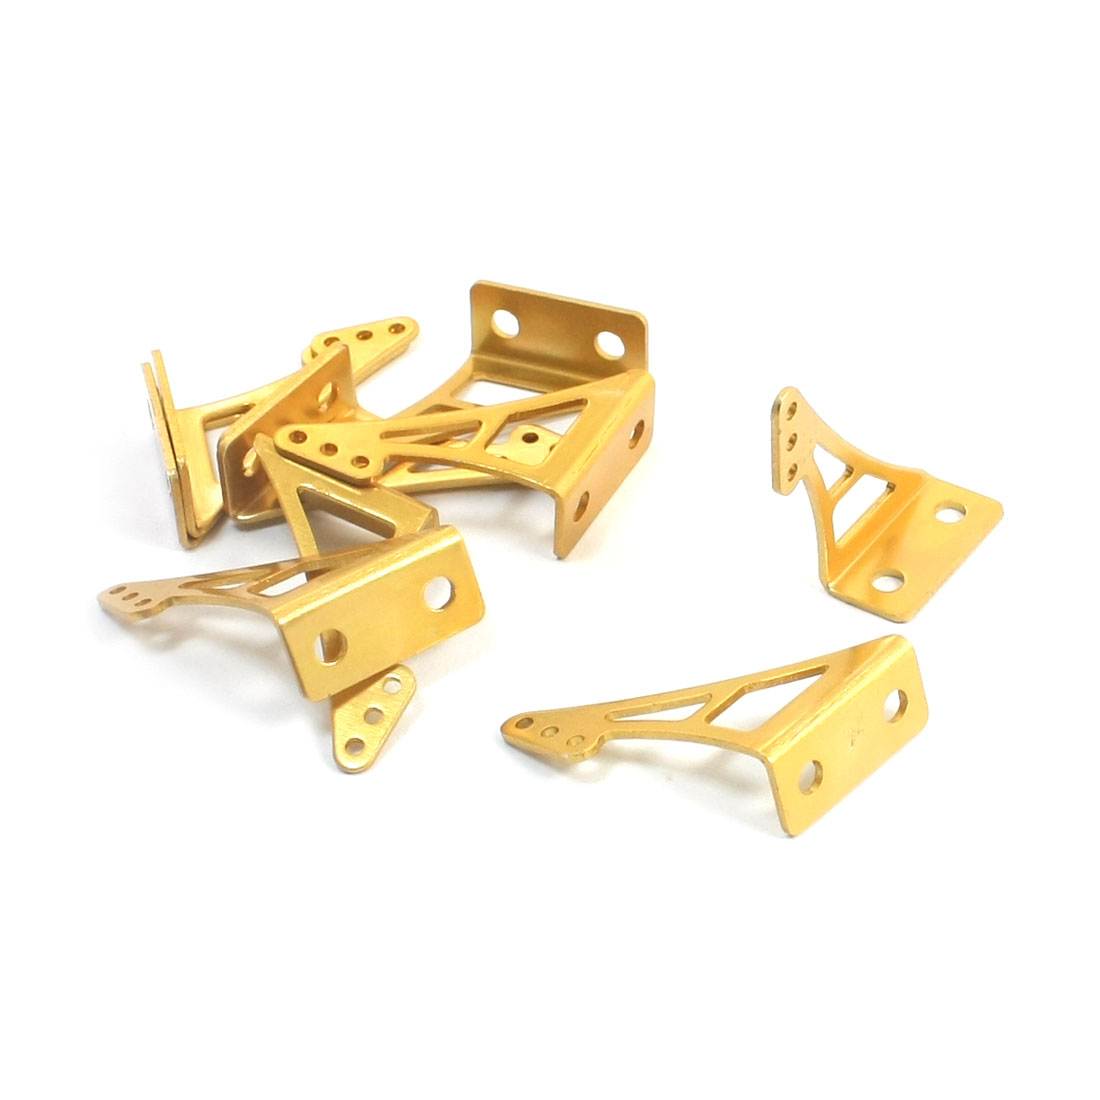 Unique Bargains 5Pairs Gold Tone Aluminum Control Horns 20 x 10mm Baseplate 30mm Height